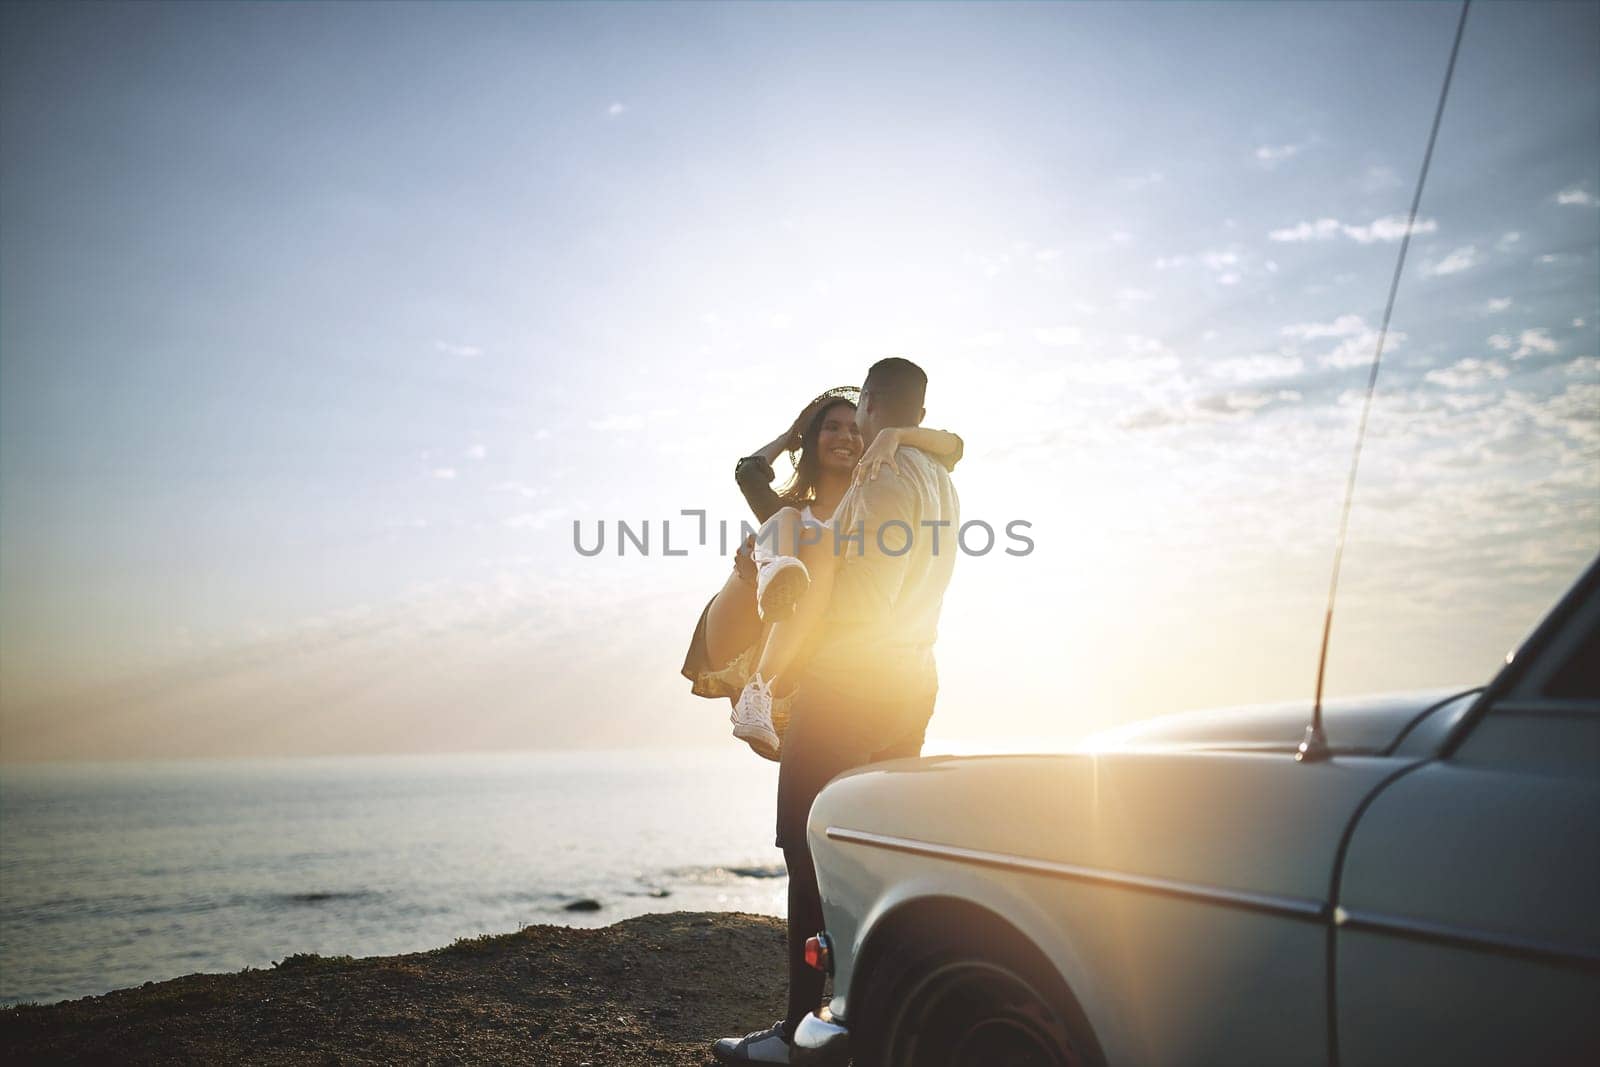 We fell in love where the sky touches the sea. a young couple making a stop at the beach while out on a road trip